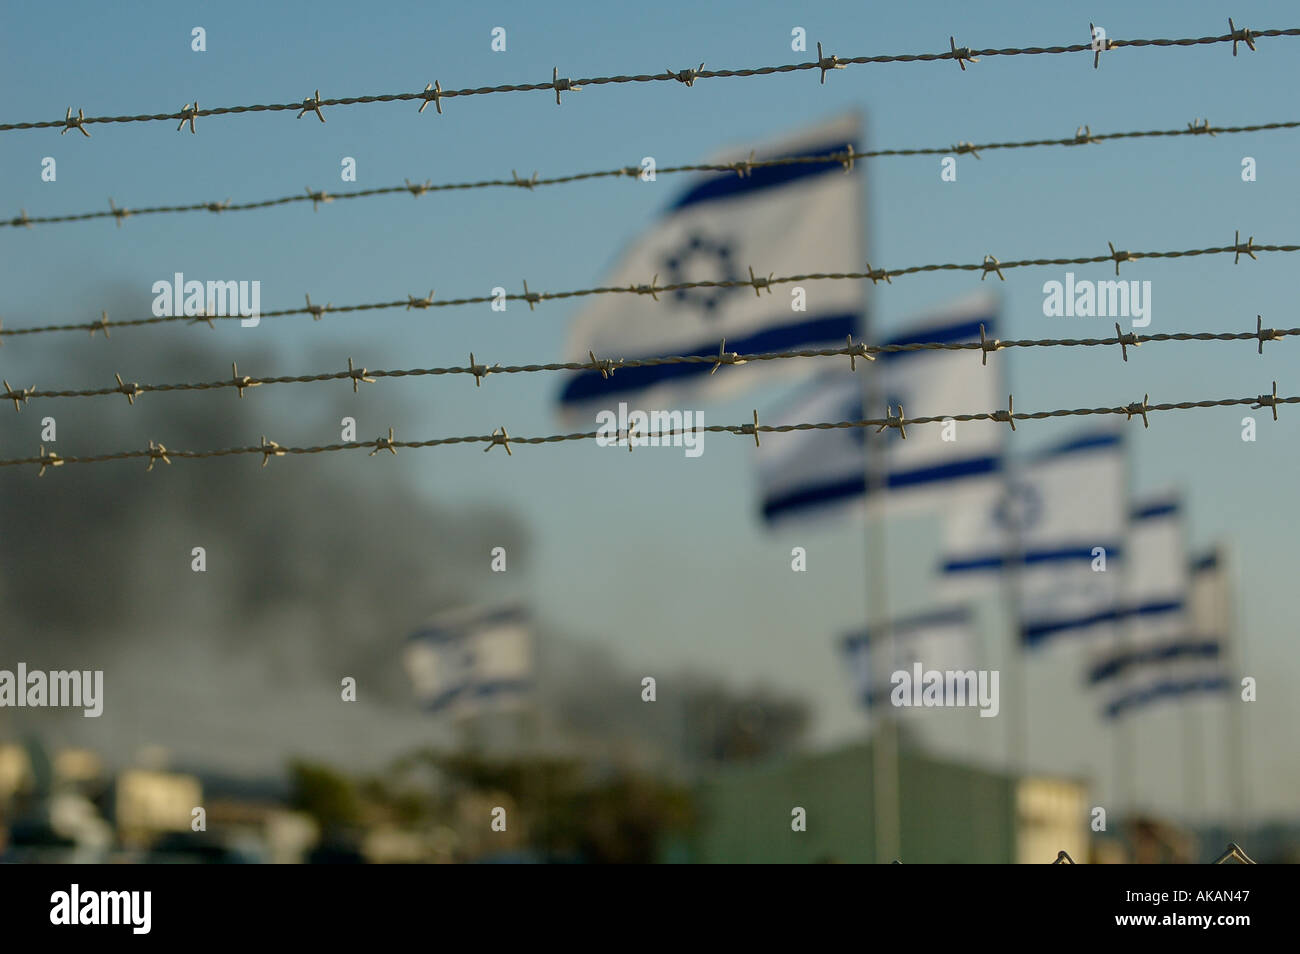 Row of Israeli flags flutter in the wind behind barbed wire fence with heavy smoke in background during Jewish settlement evacuation from Gaza strip Stock Photo